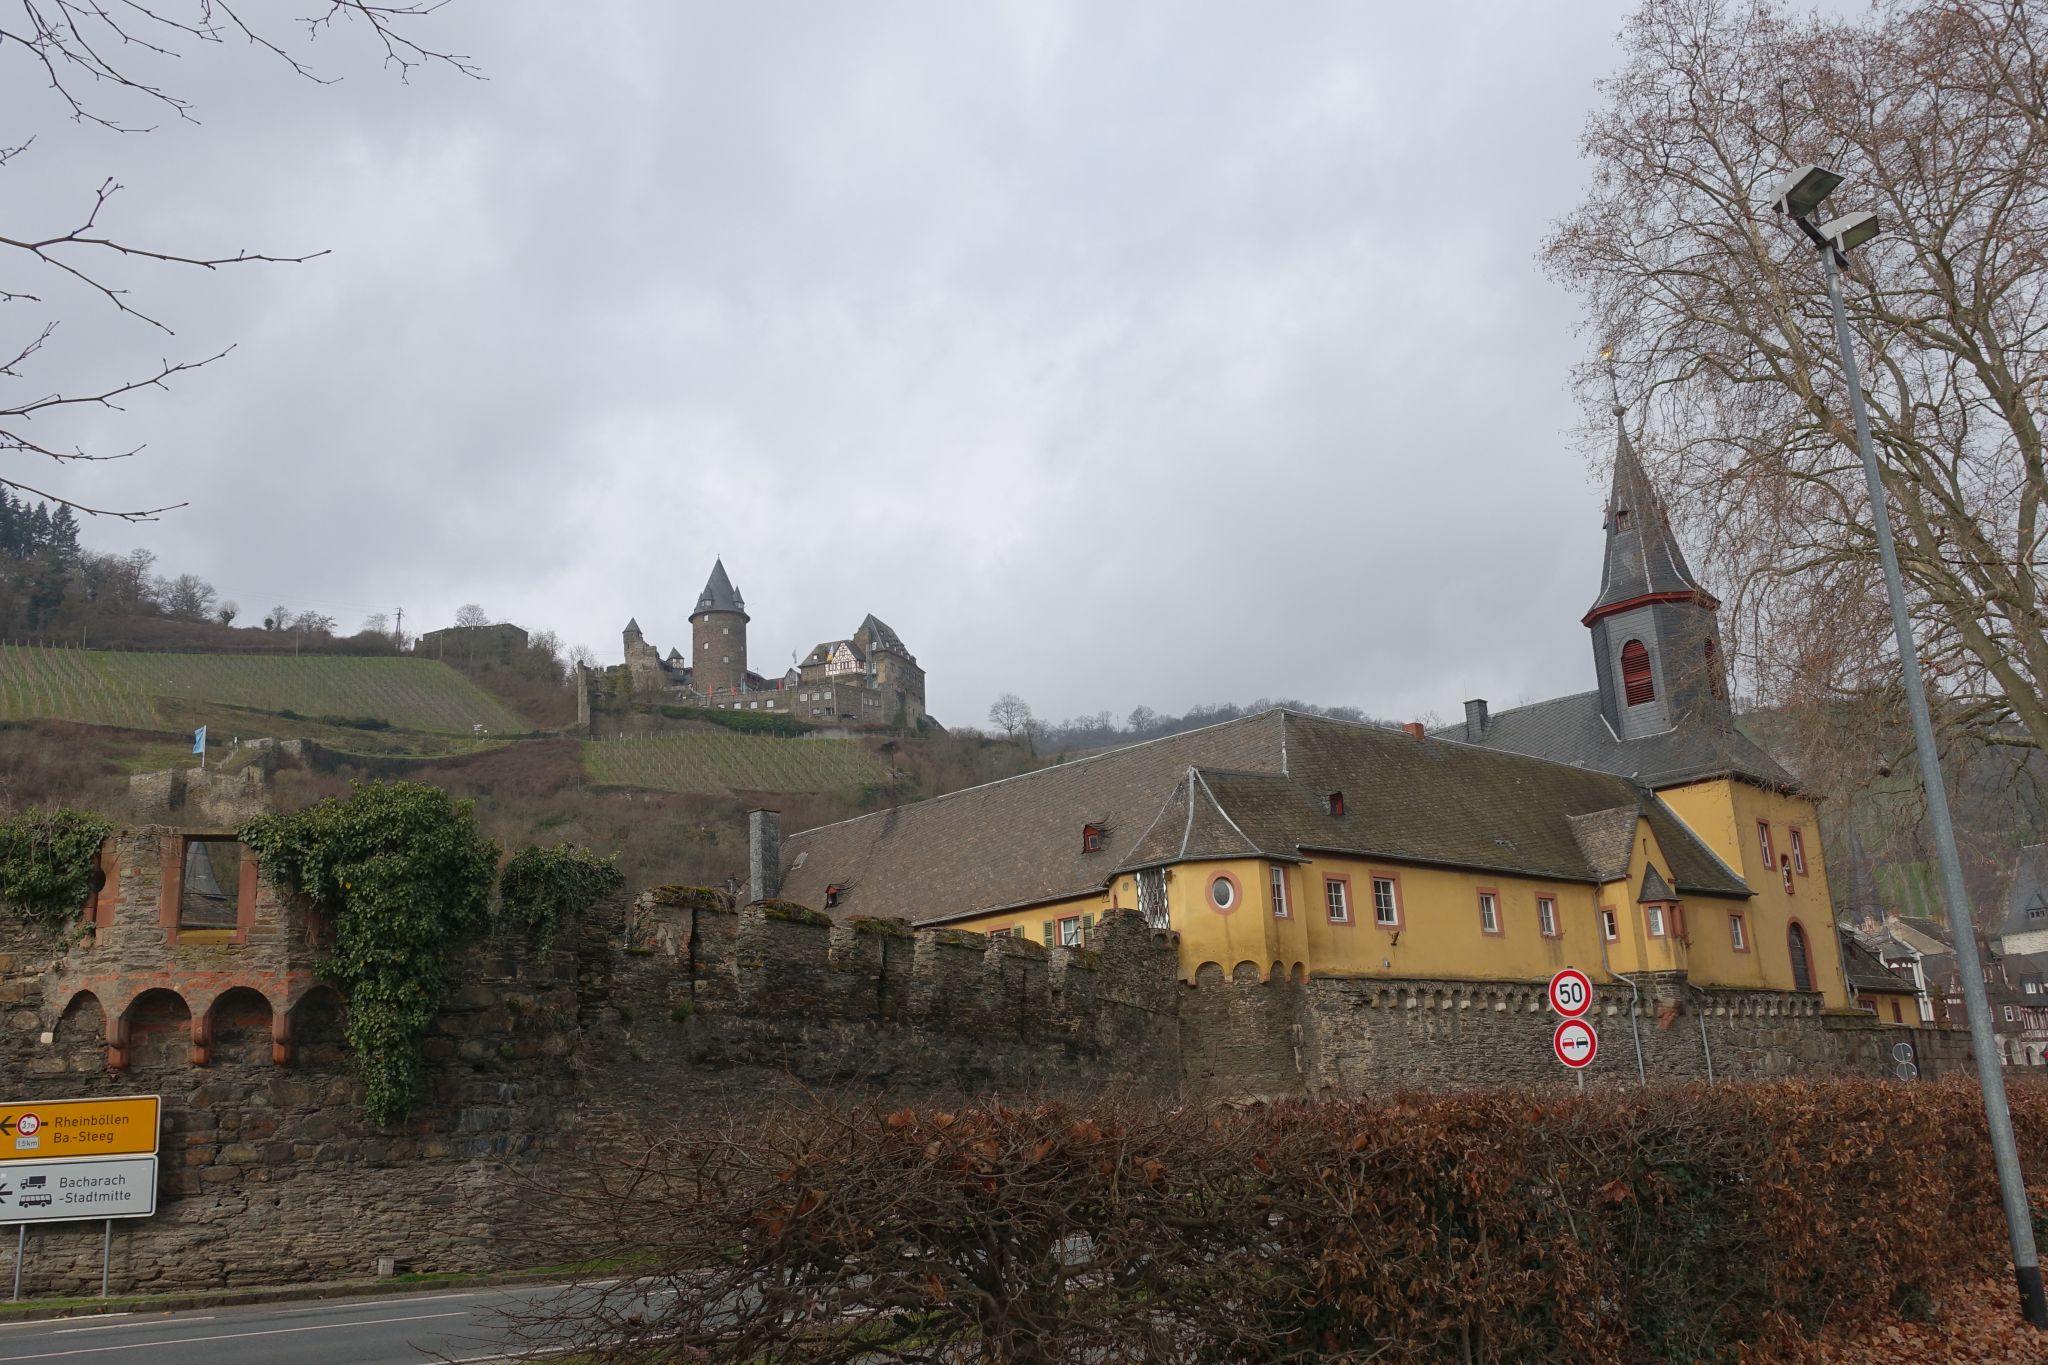 A picture shows old city walls with a church using them as one of the walls. In the background there is a castle on a hill.